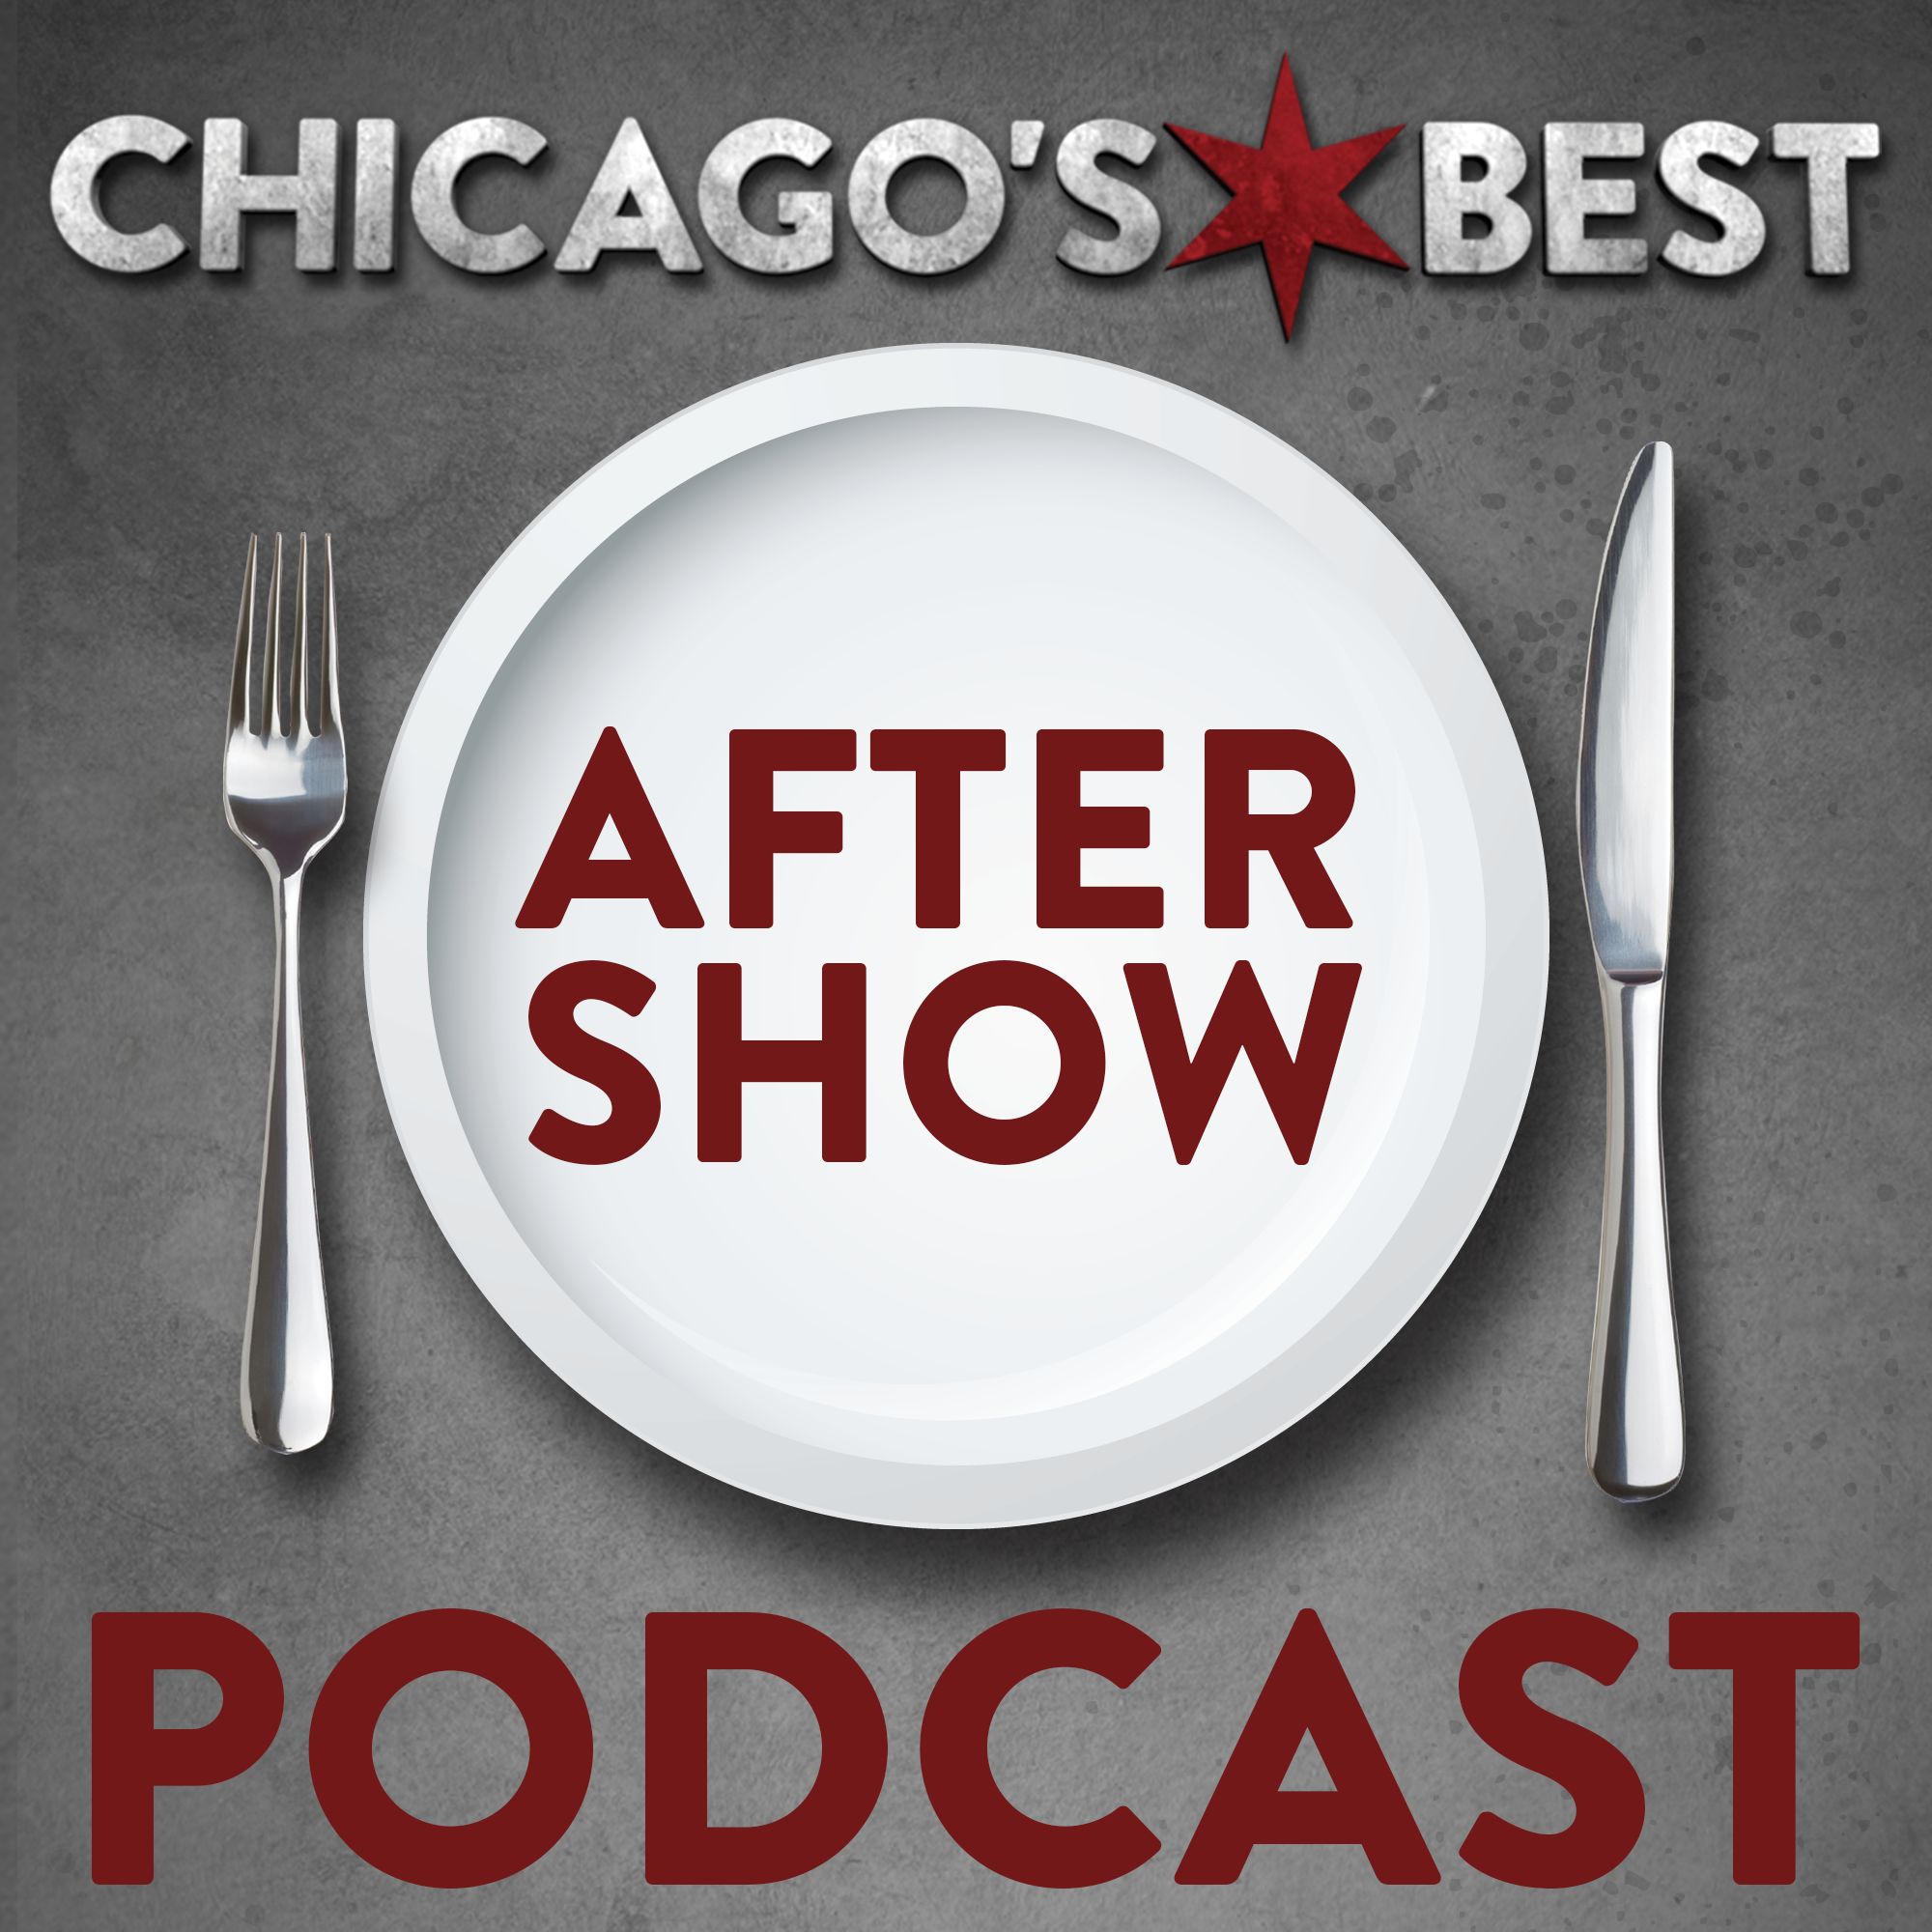 Chicago's Best After Show Podcast